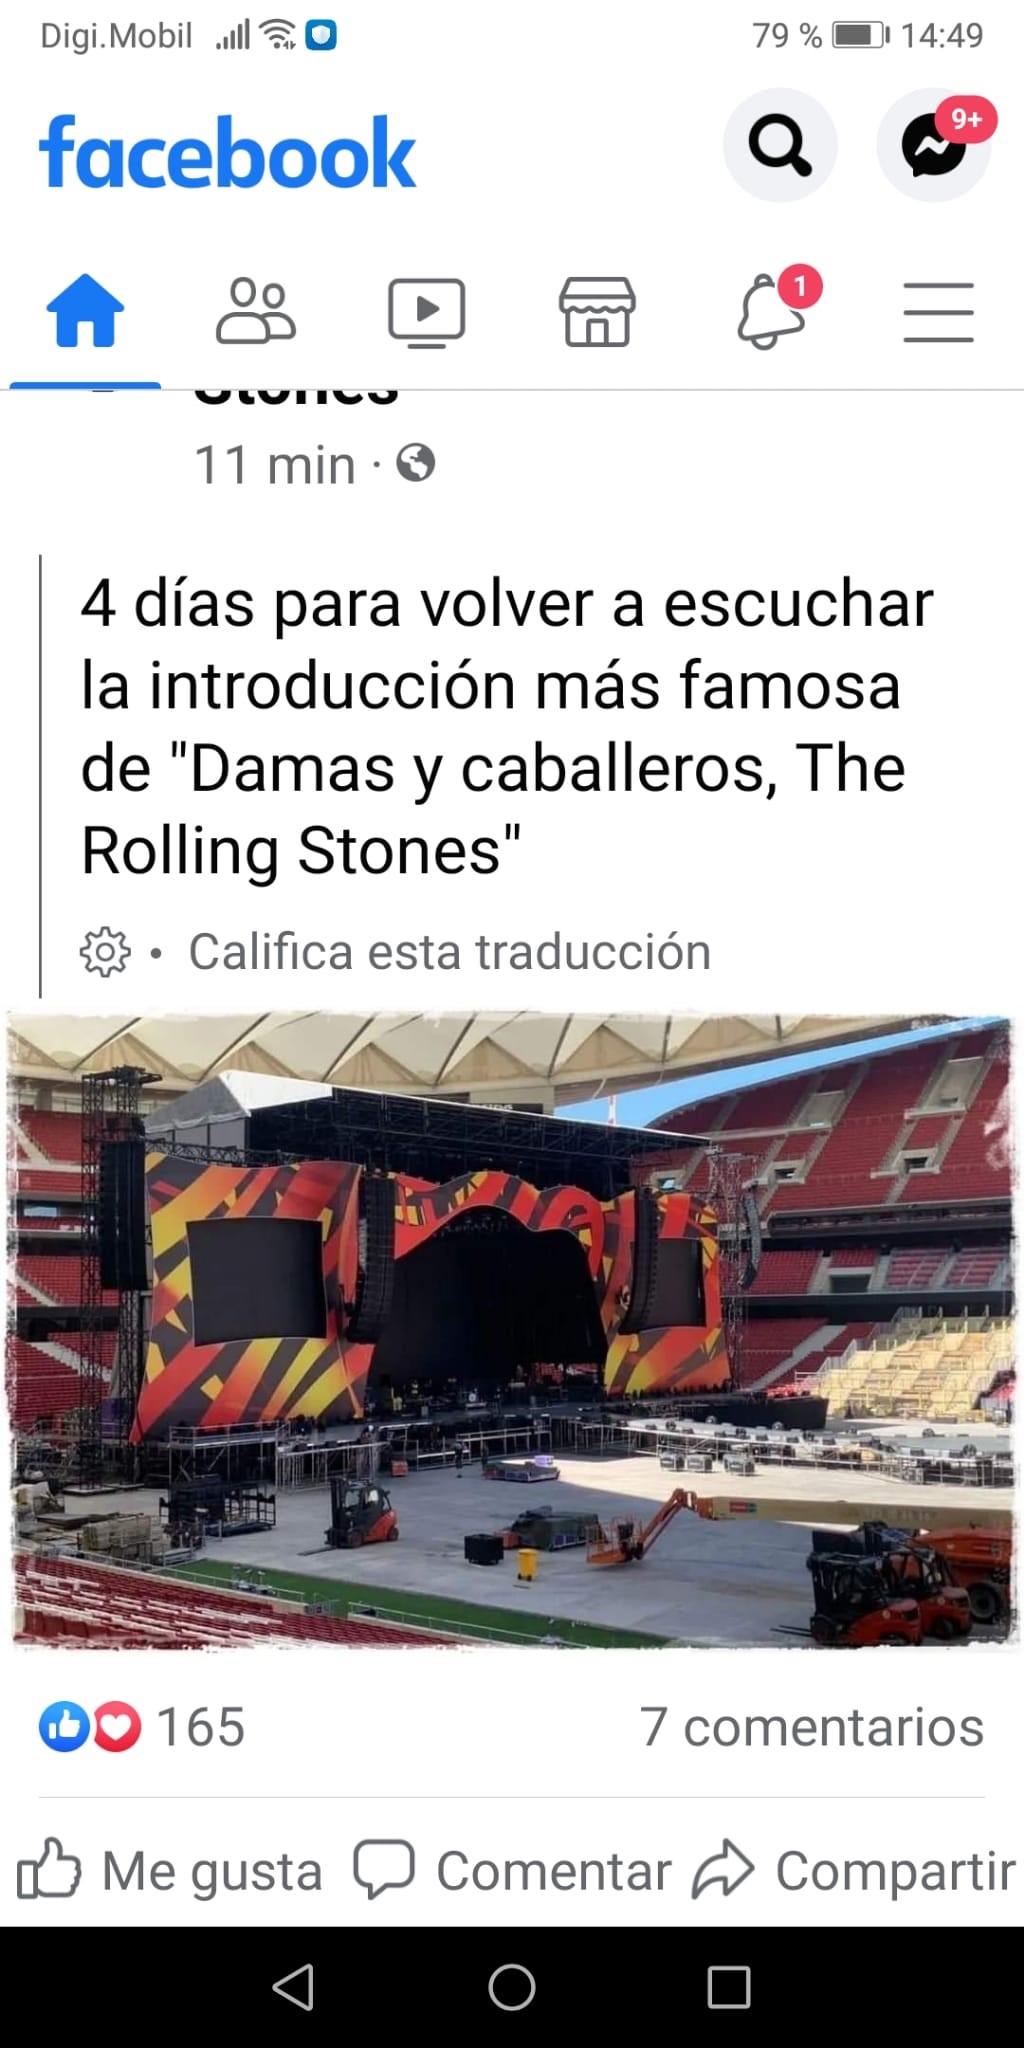 The Rolling Stones. Madrid11